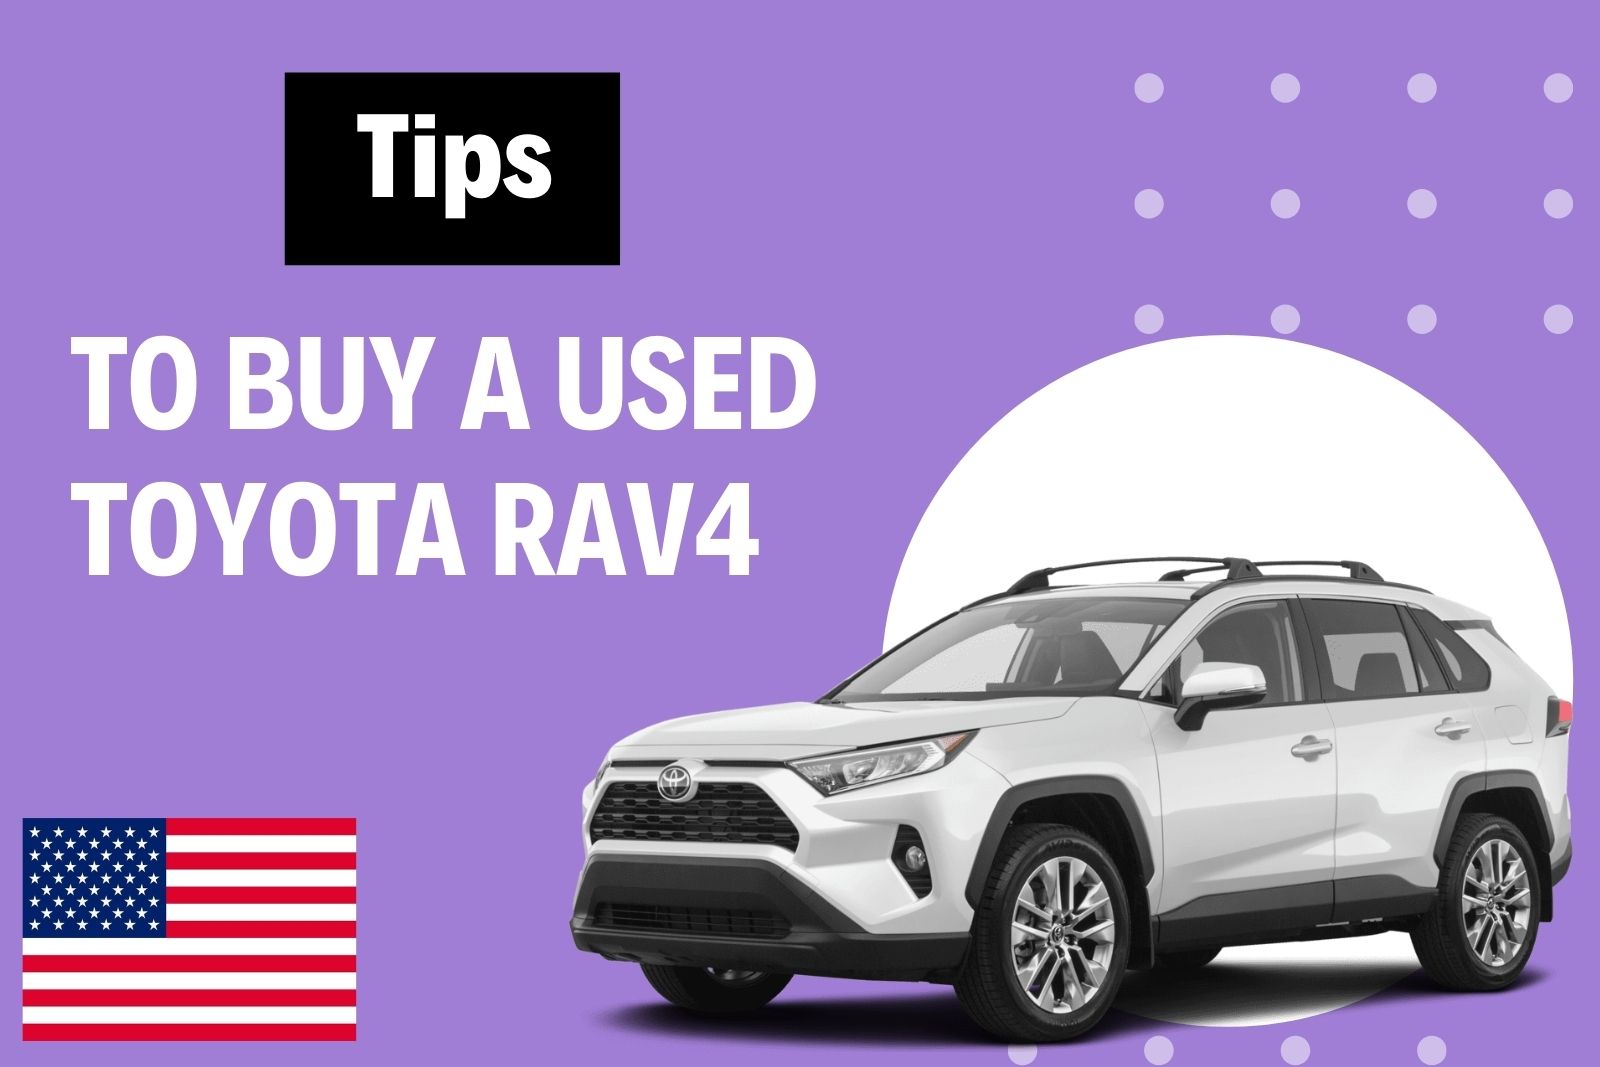 What Should You Know Before Purchasing A Used Toyota For Sale - RAV4?